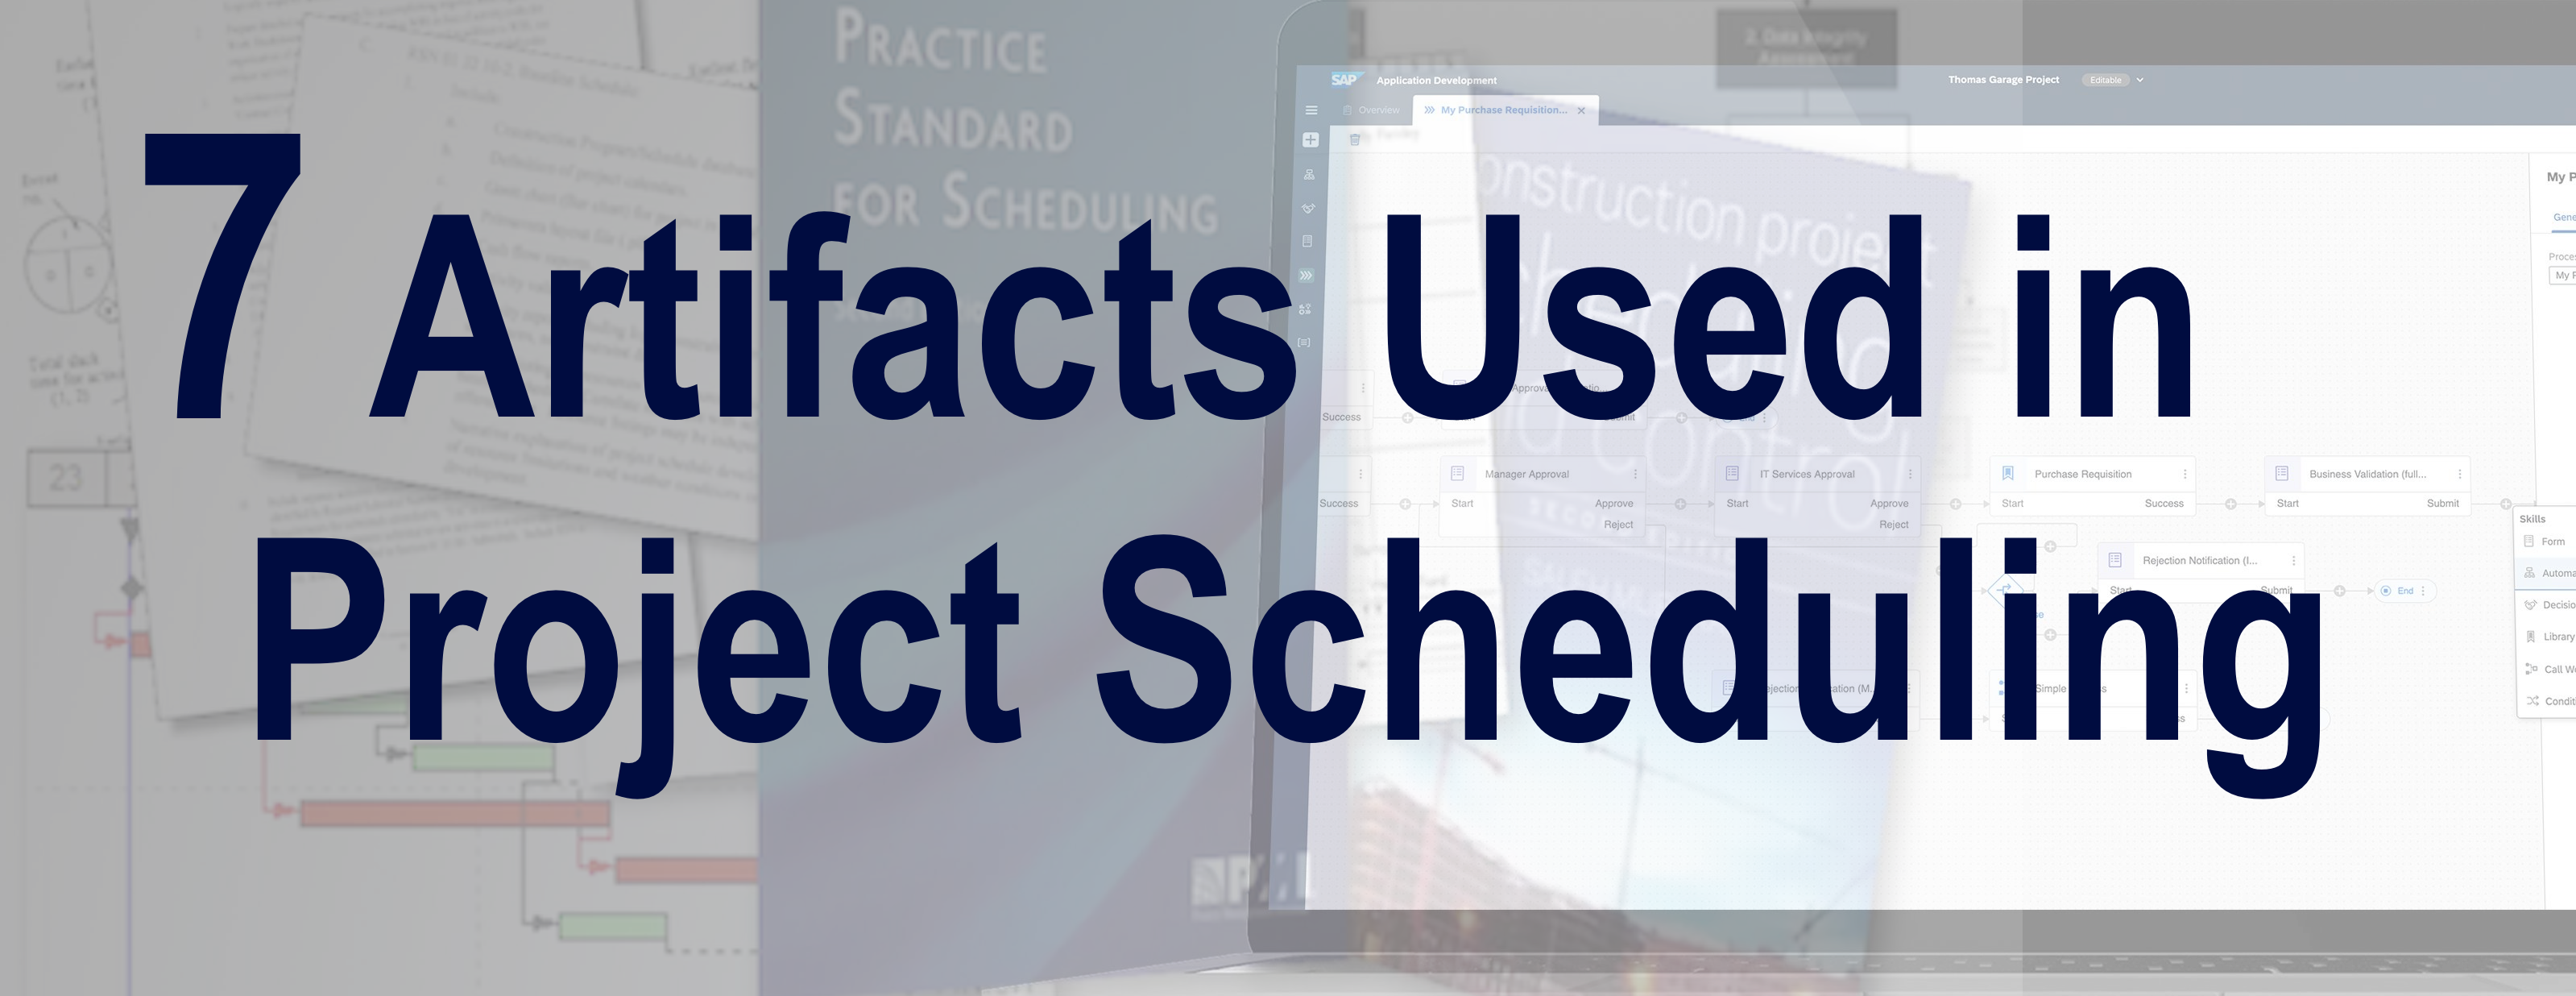 7 Artifacts Used in Project Scheduling